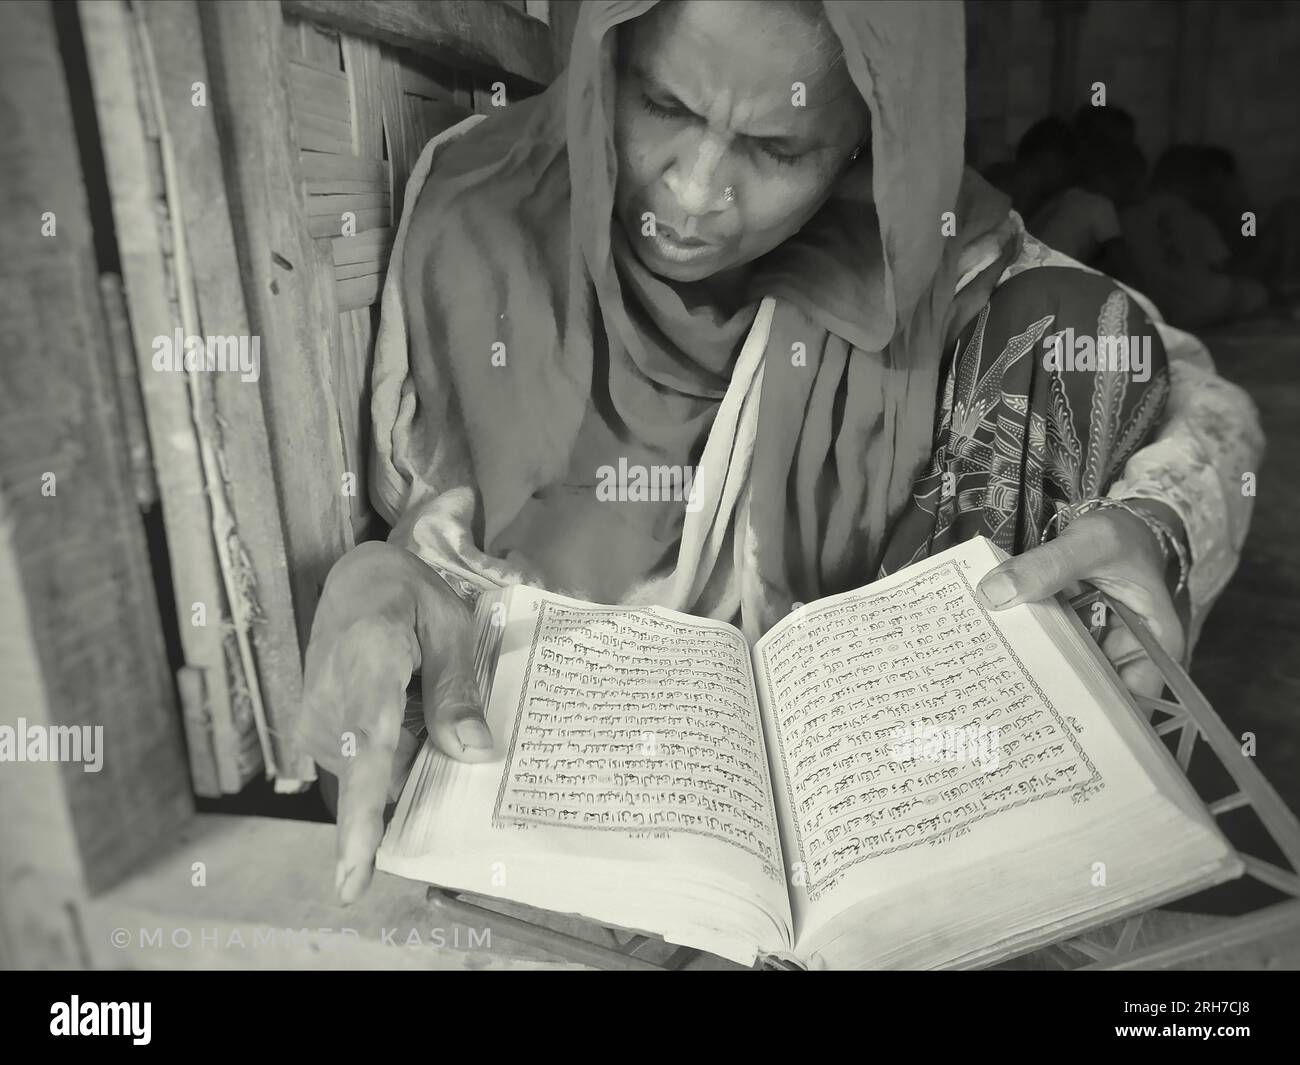 A woman reading the quran. Approximately 919,000 Rohingya refugees are living at the Kutupalong and Nayapara camps in Cox’s Bazar region — which have grown to become some of the largest and most densely populated camps in the world. Bangladesh. Stock Photo